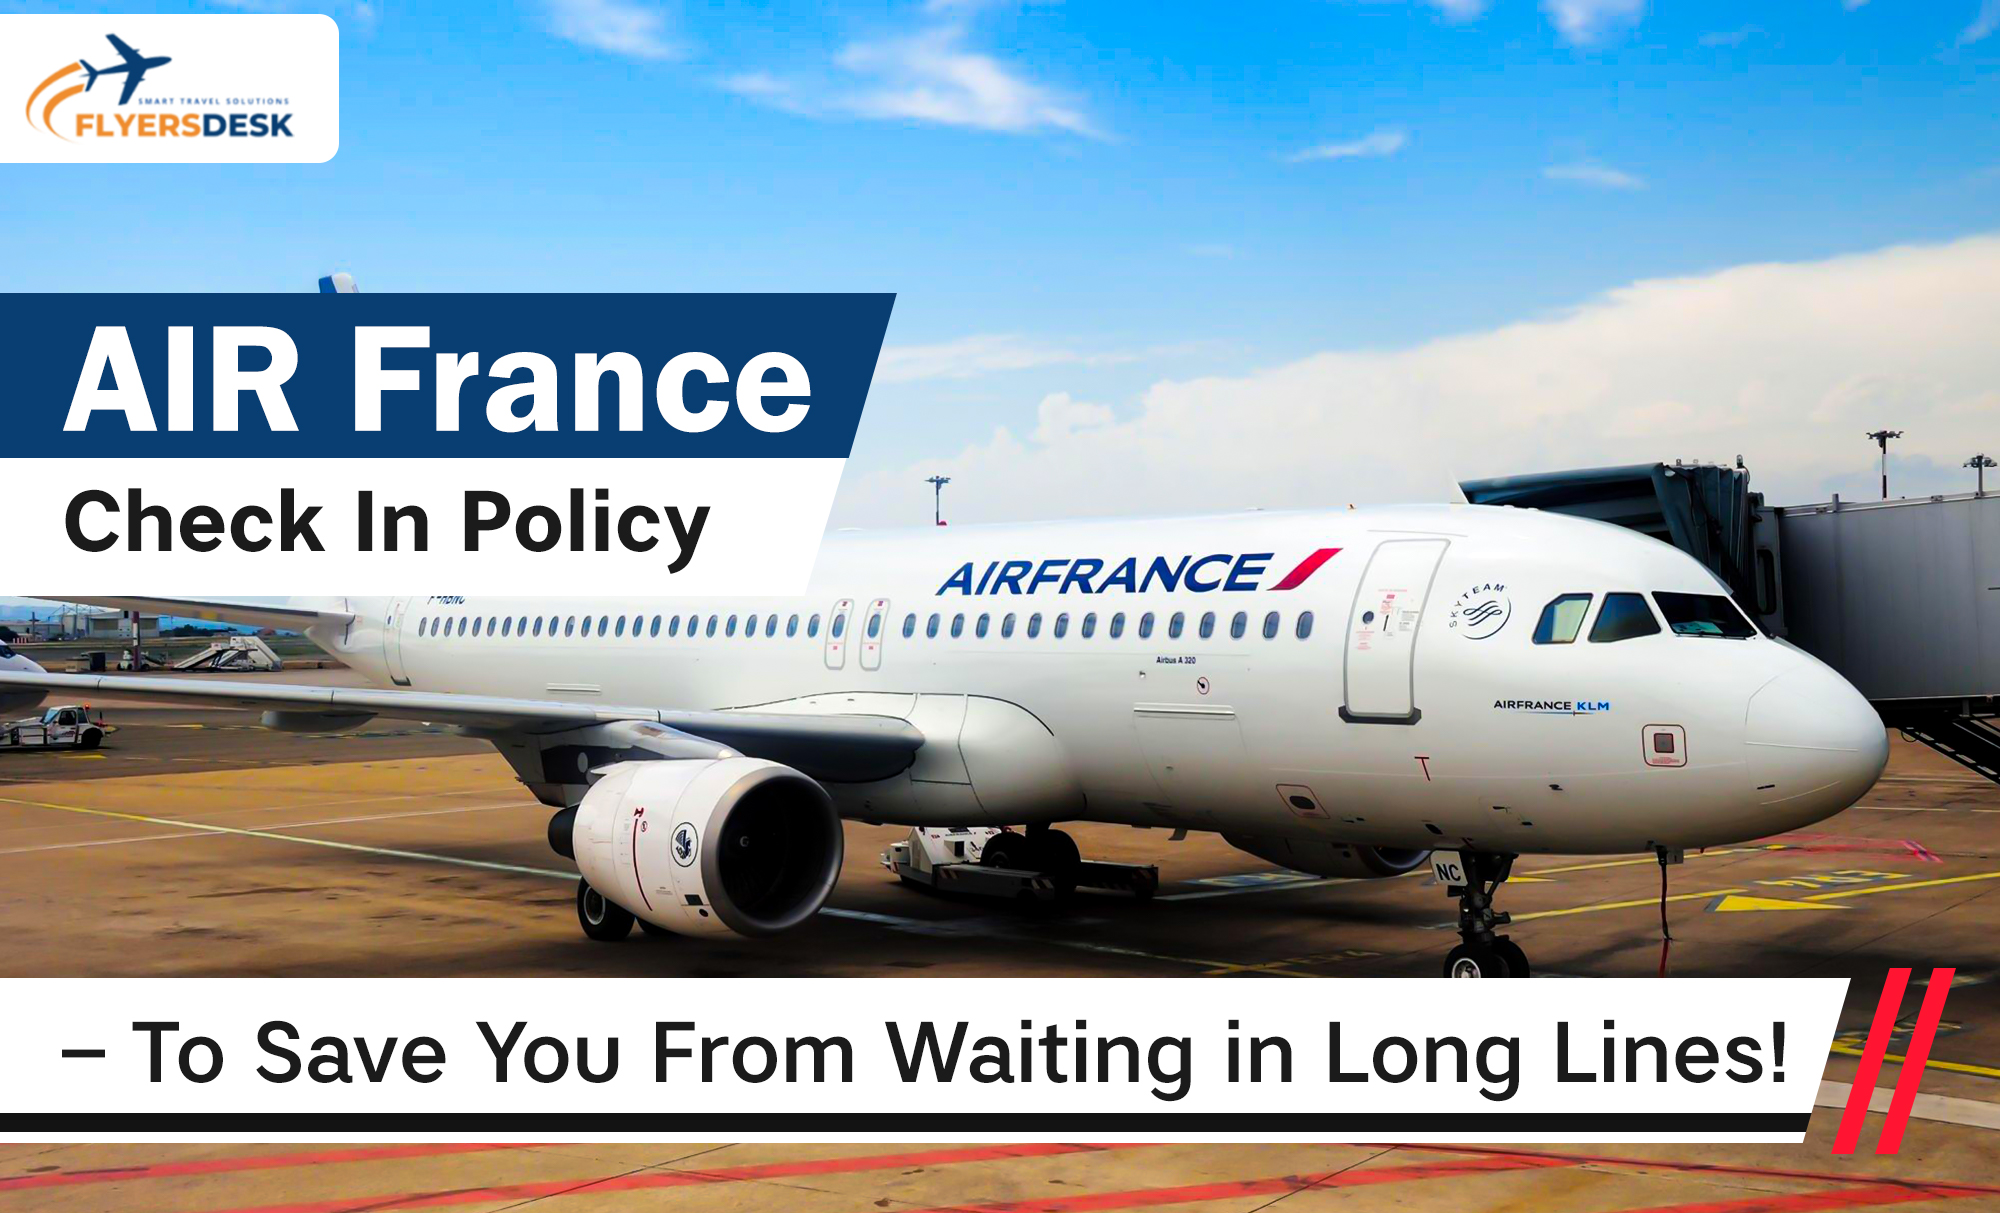 Air France check in policy